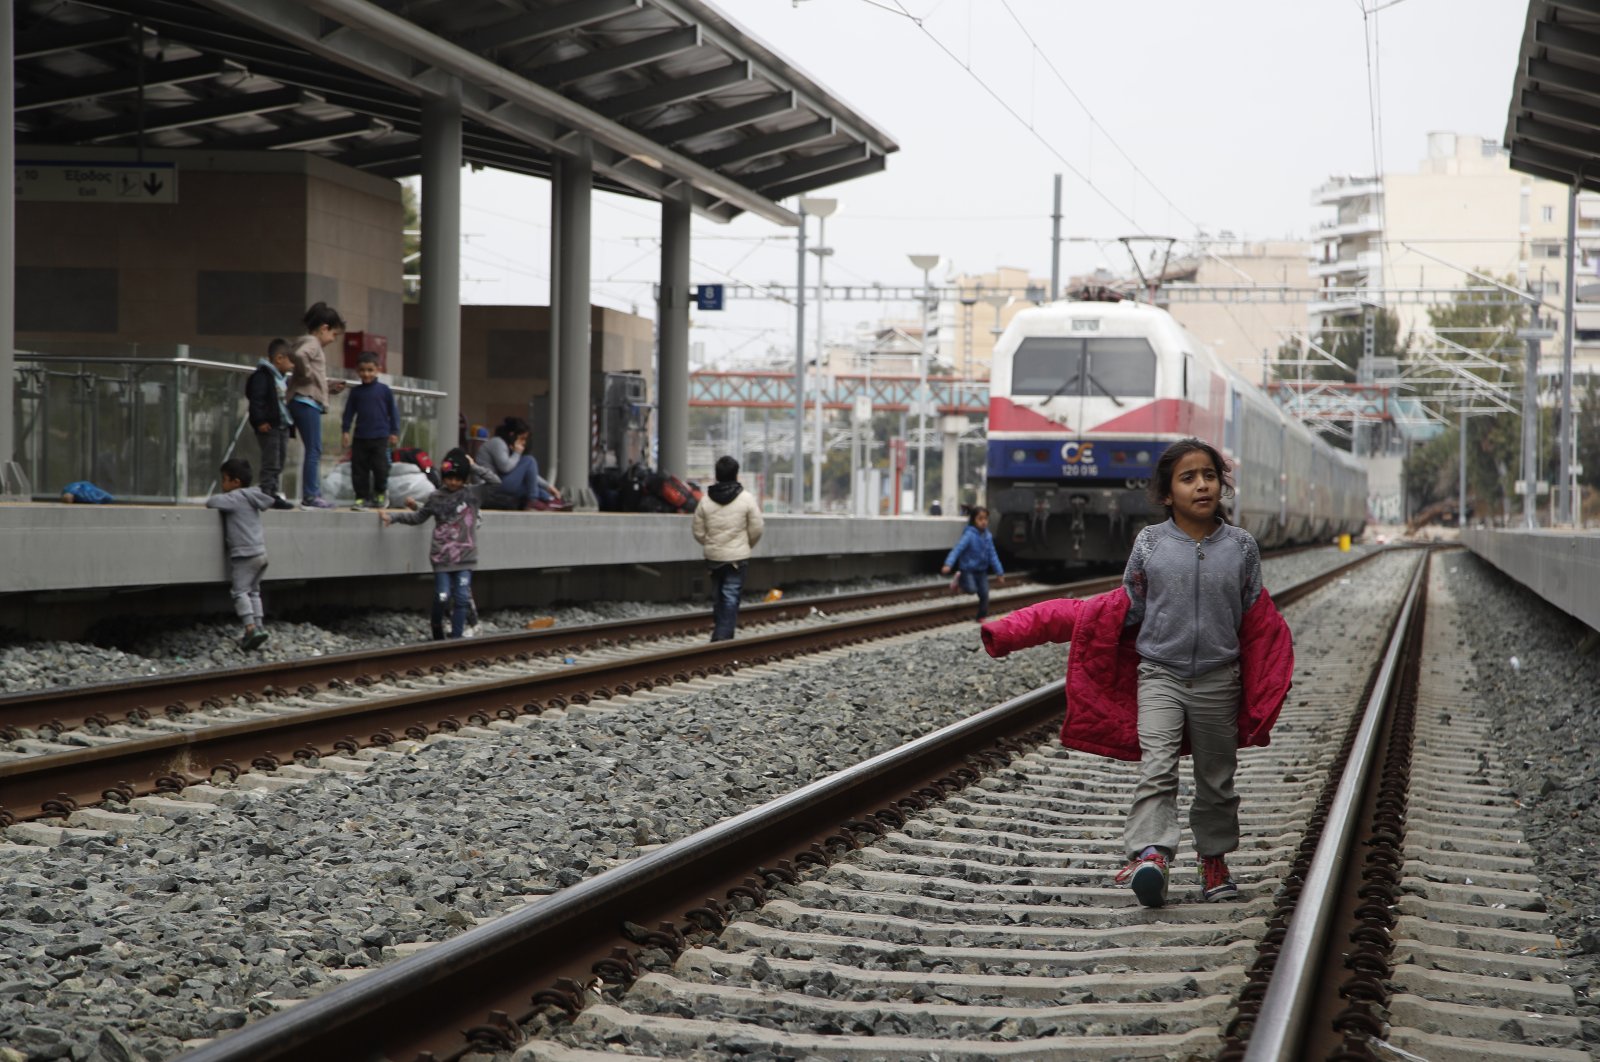 A migrant boy walks on a rail track at the Larissis Station in Athens, Greece, April 5, 2019. (AP Photo)